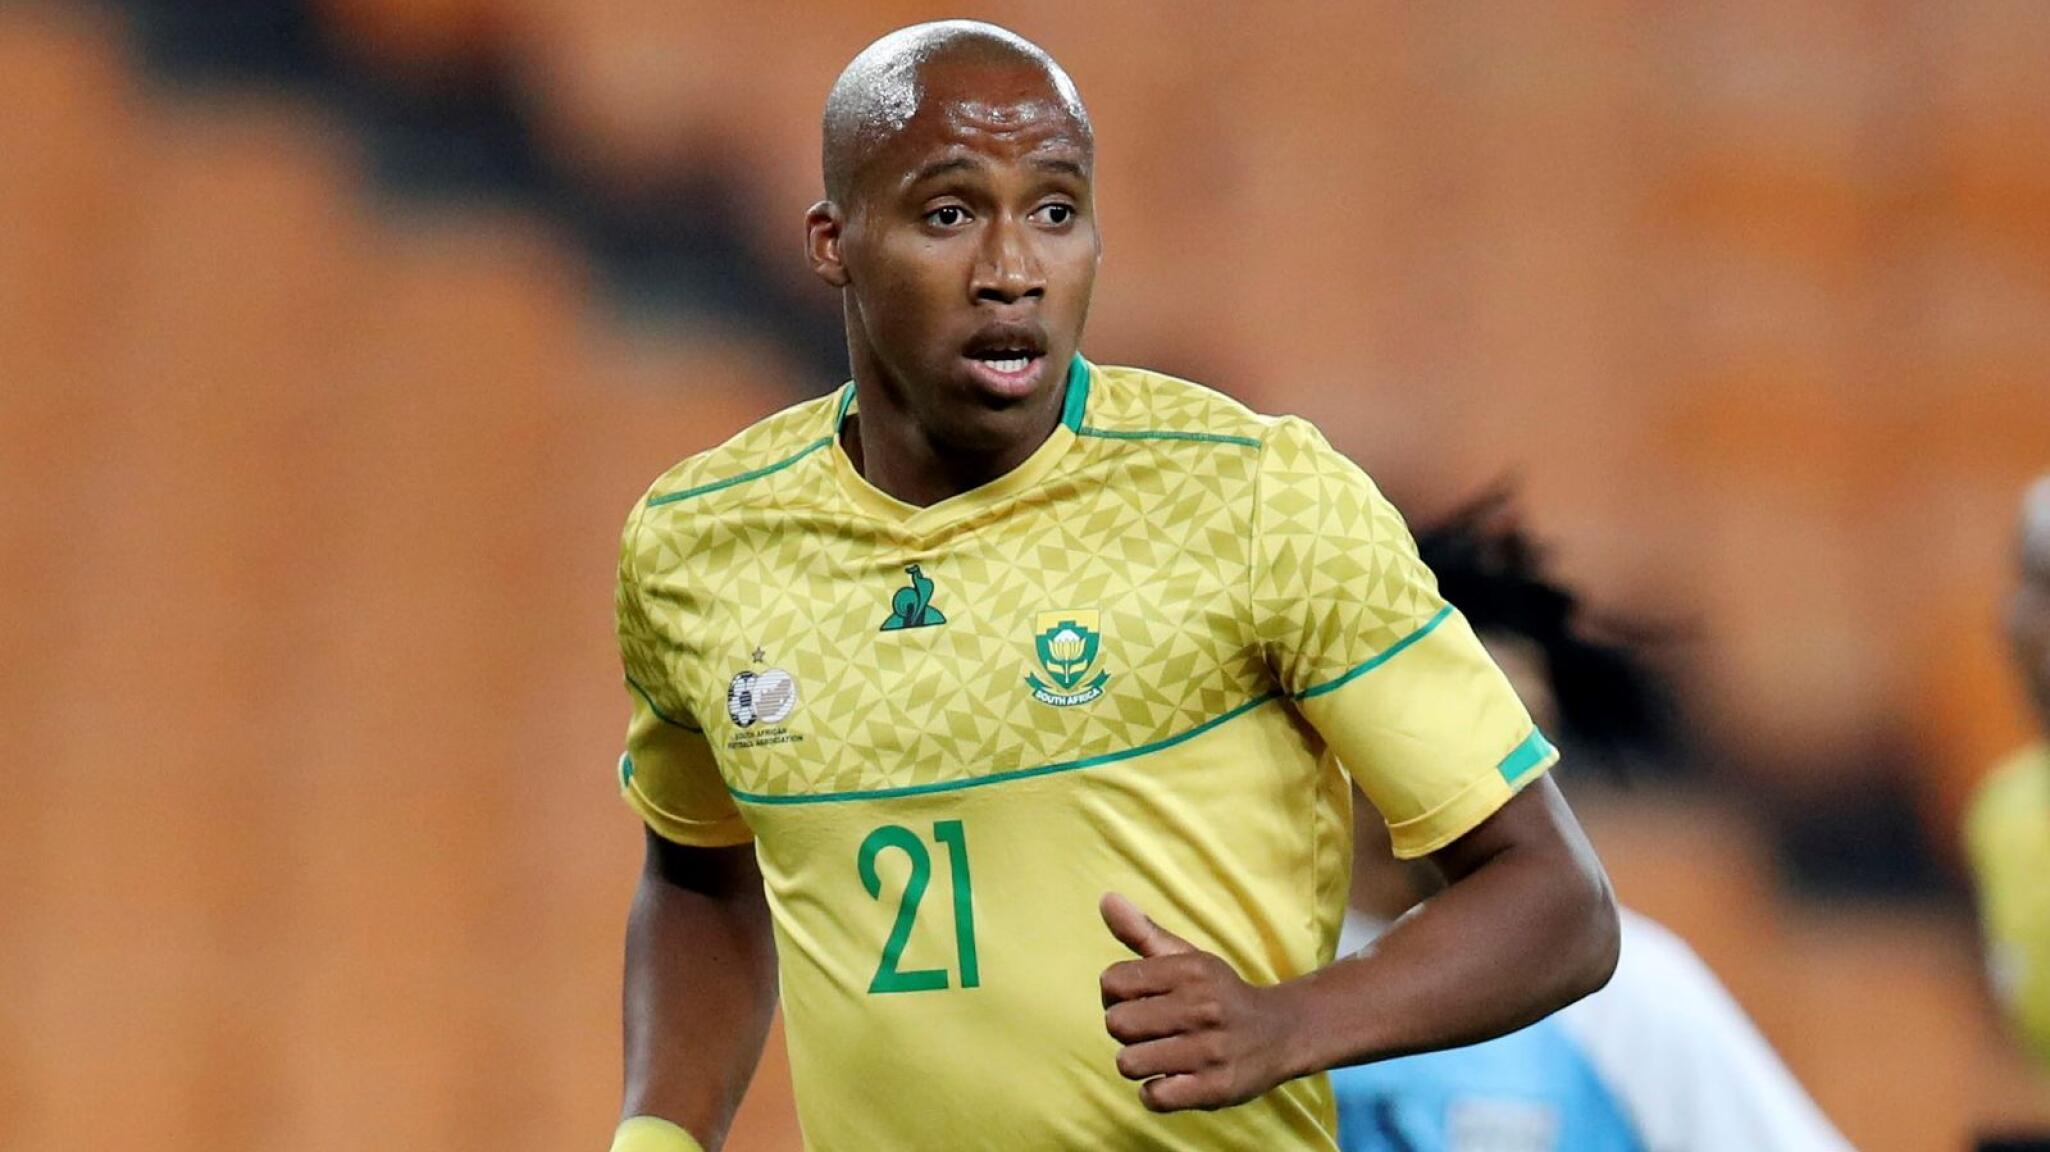 Mihlali Mayambela scored the winning goal in Tuesday’s Africa Cup of Nations qualifier against Liberia.